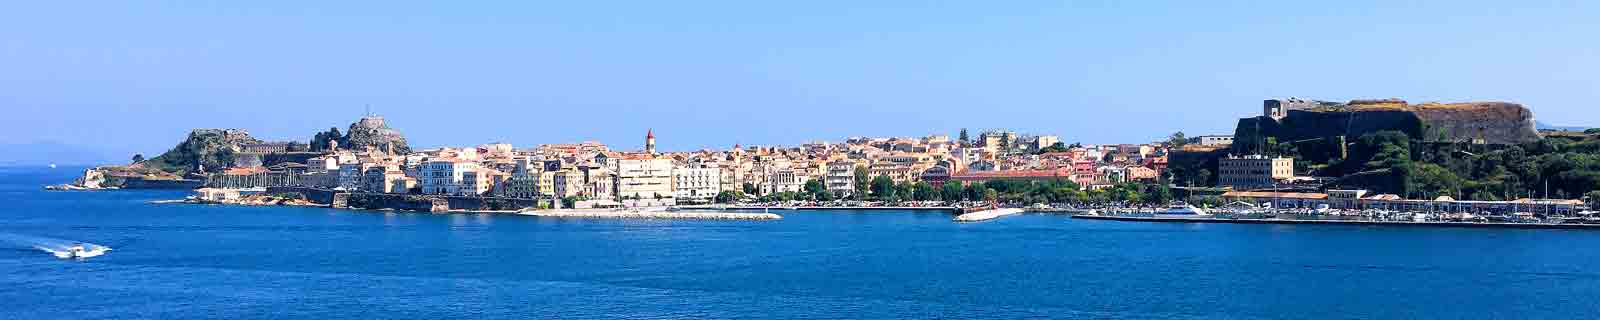 Panoramic photo of the Corfu old Town and cruise port